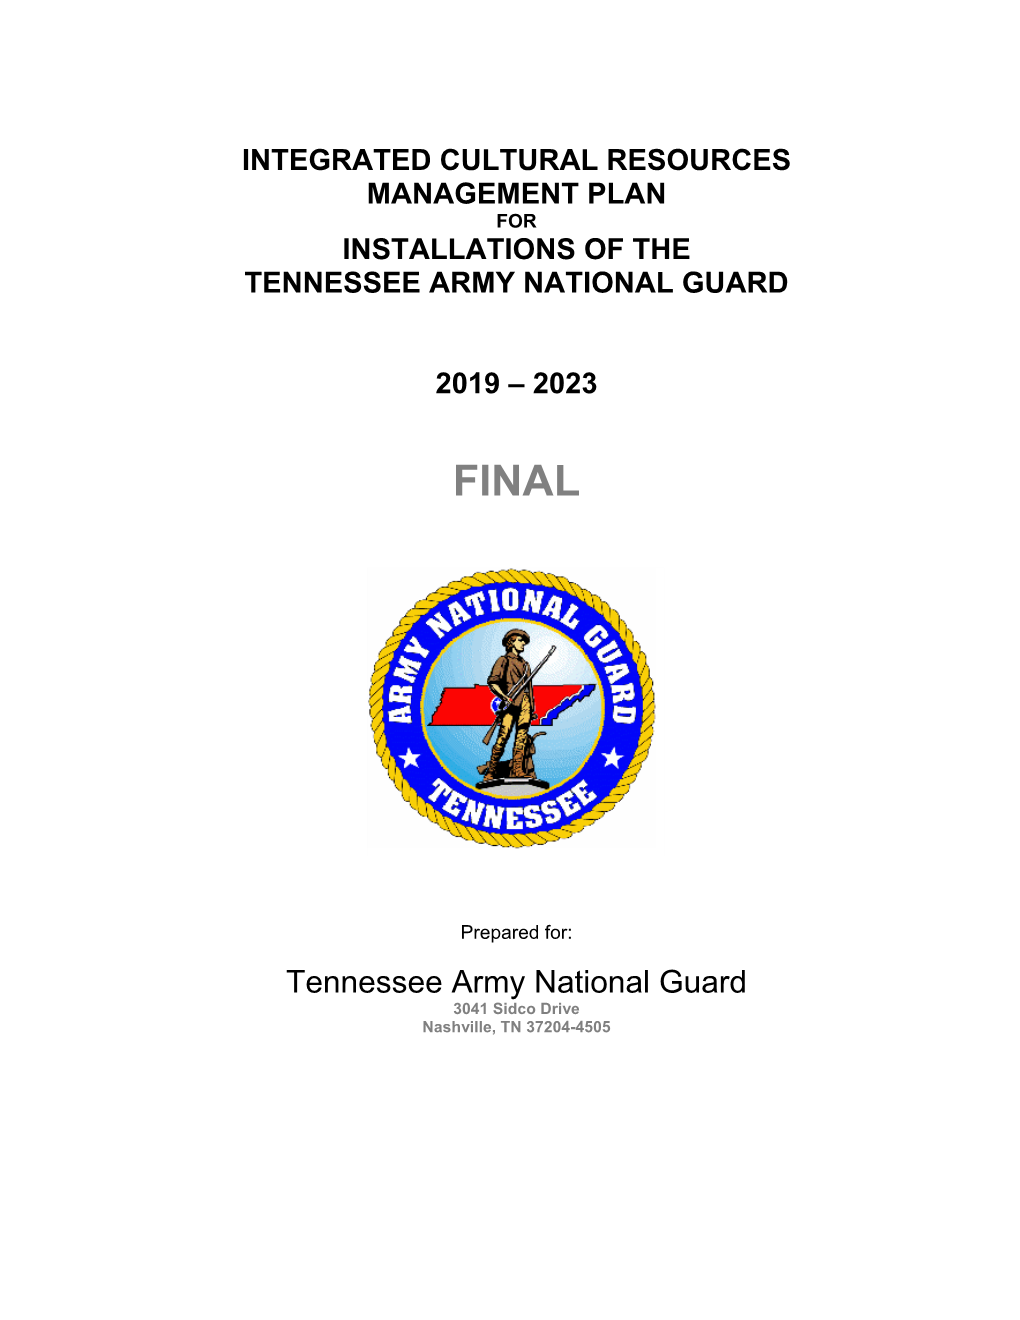 Integrated Cultural Resources Management Plan for Installations of the Tennessee Army National Guard